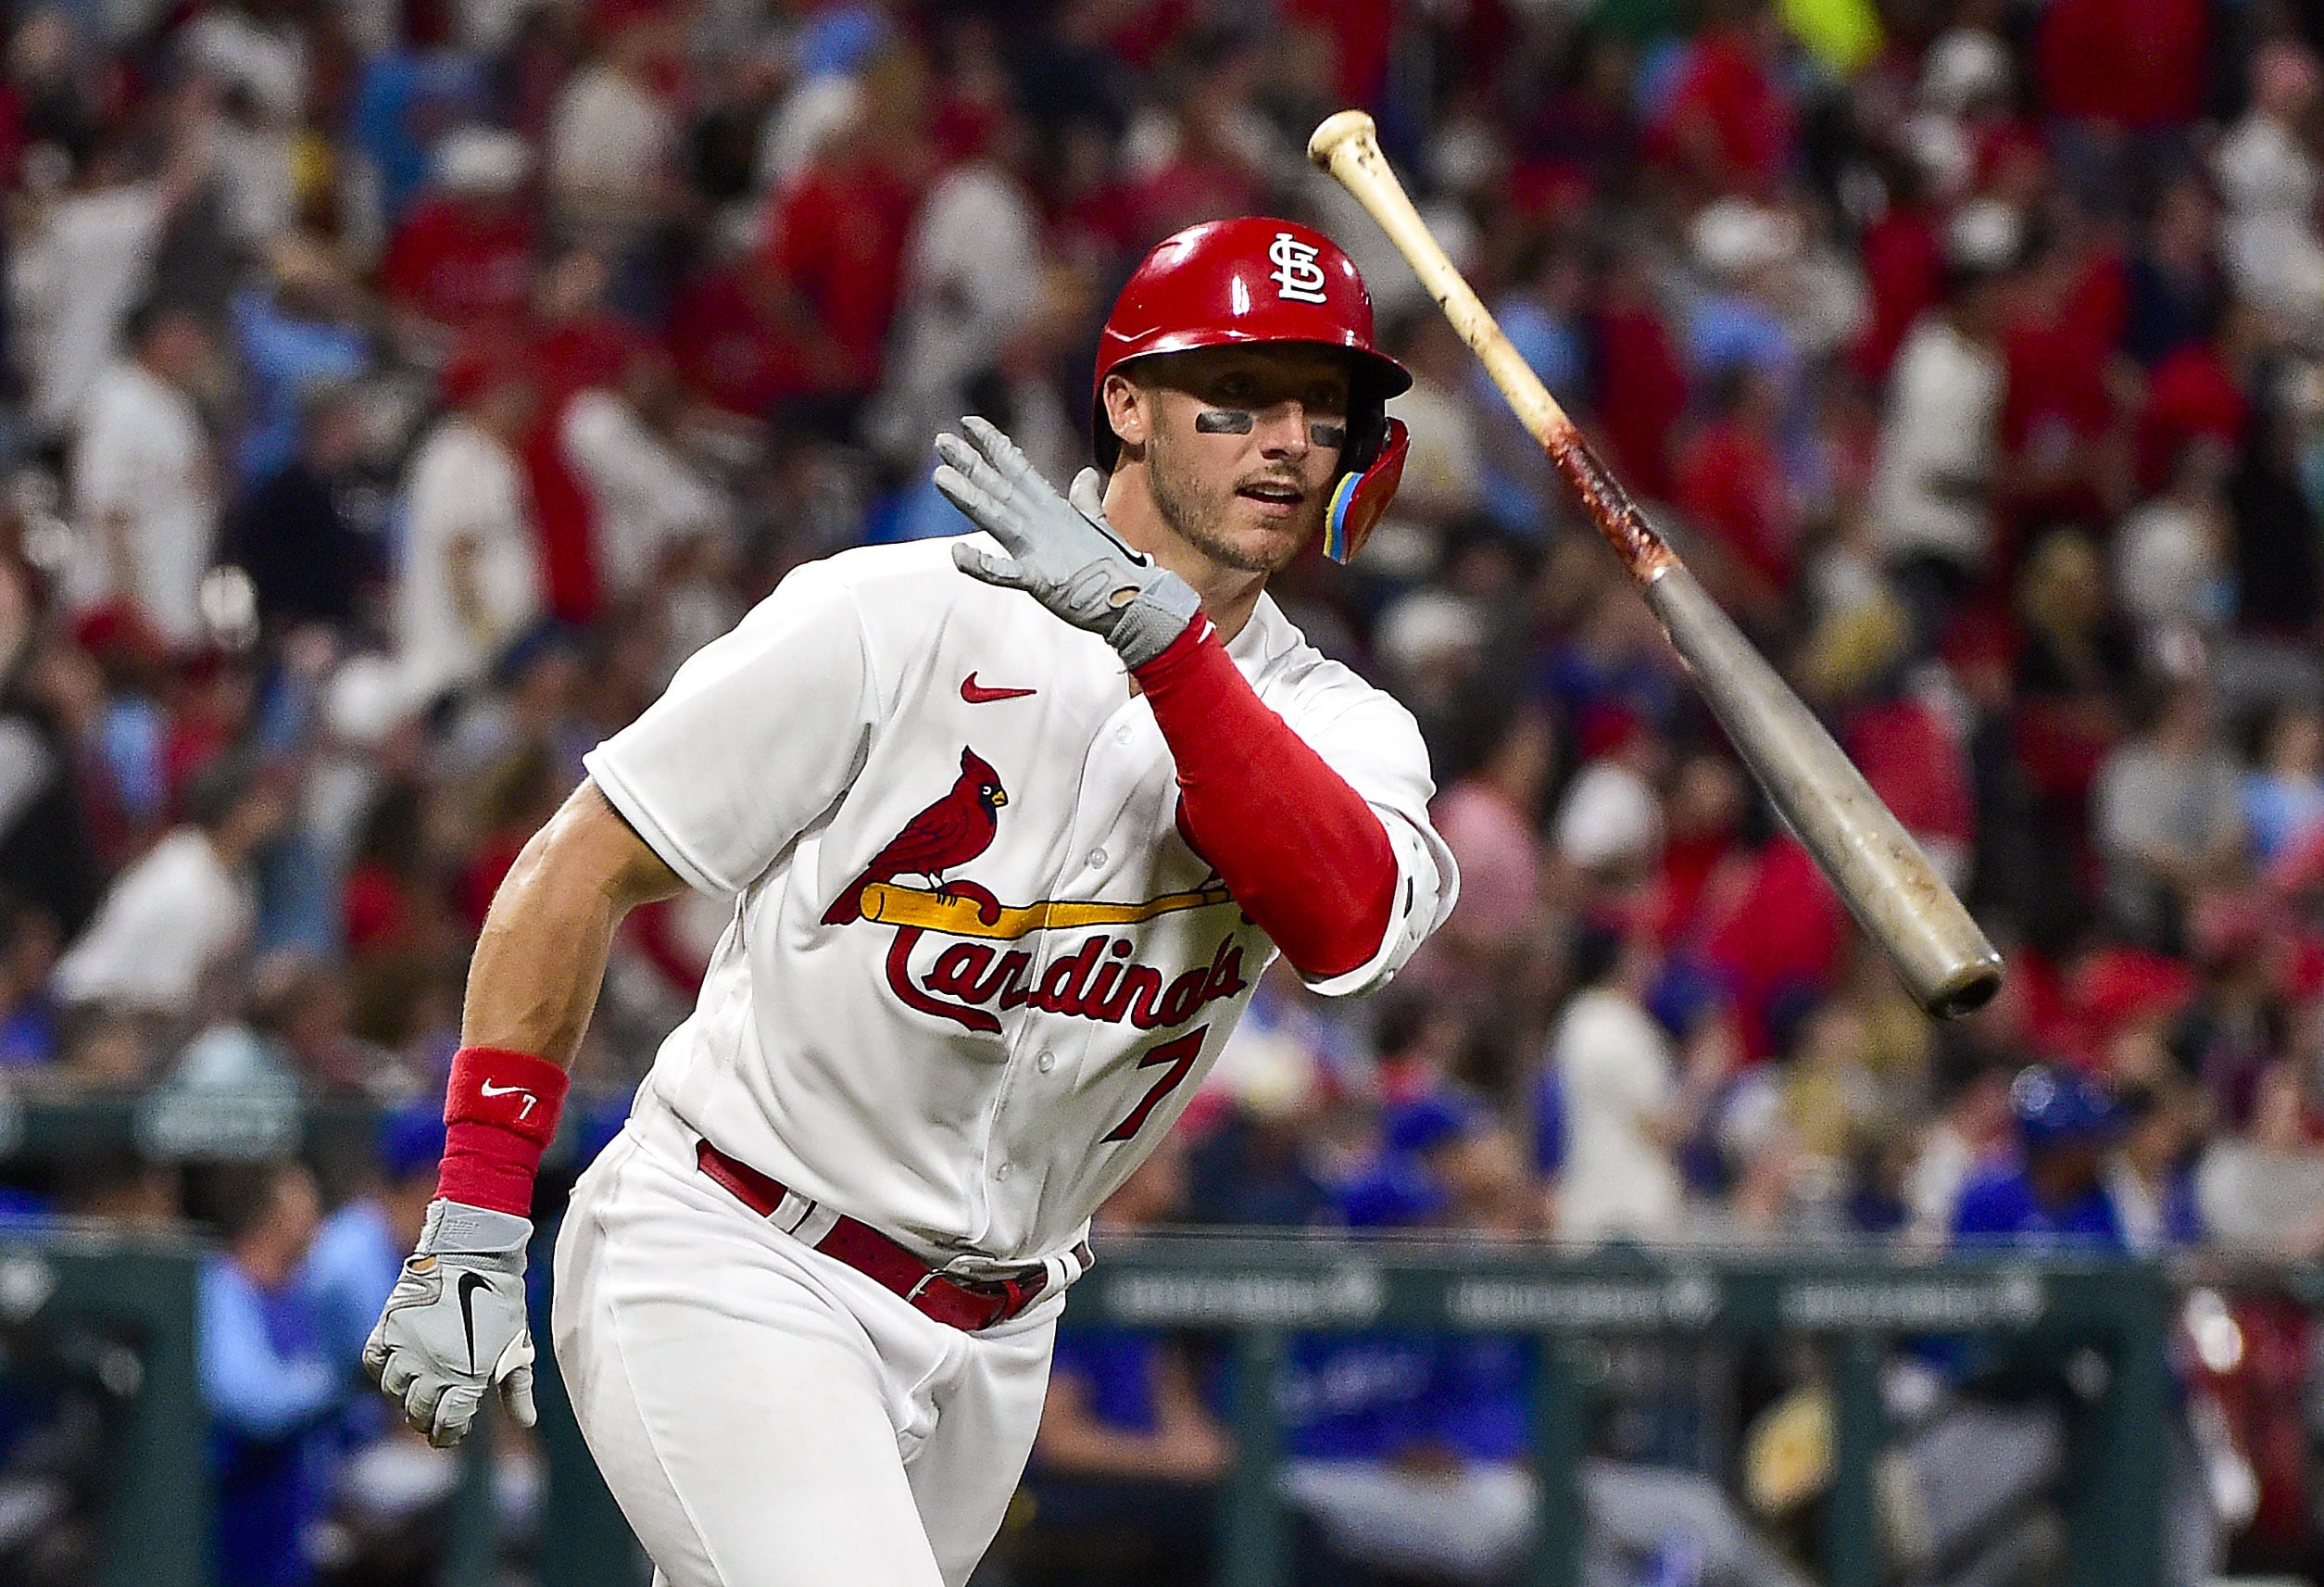 St. Louis Cardinals catcher Andrew Knizner (7) flips his bat after hitting a three run home run against the Kansas City Royals during the fourth inning at Busch Stadium.